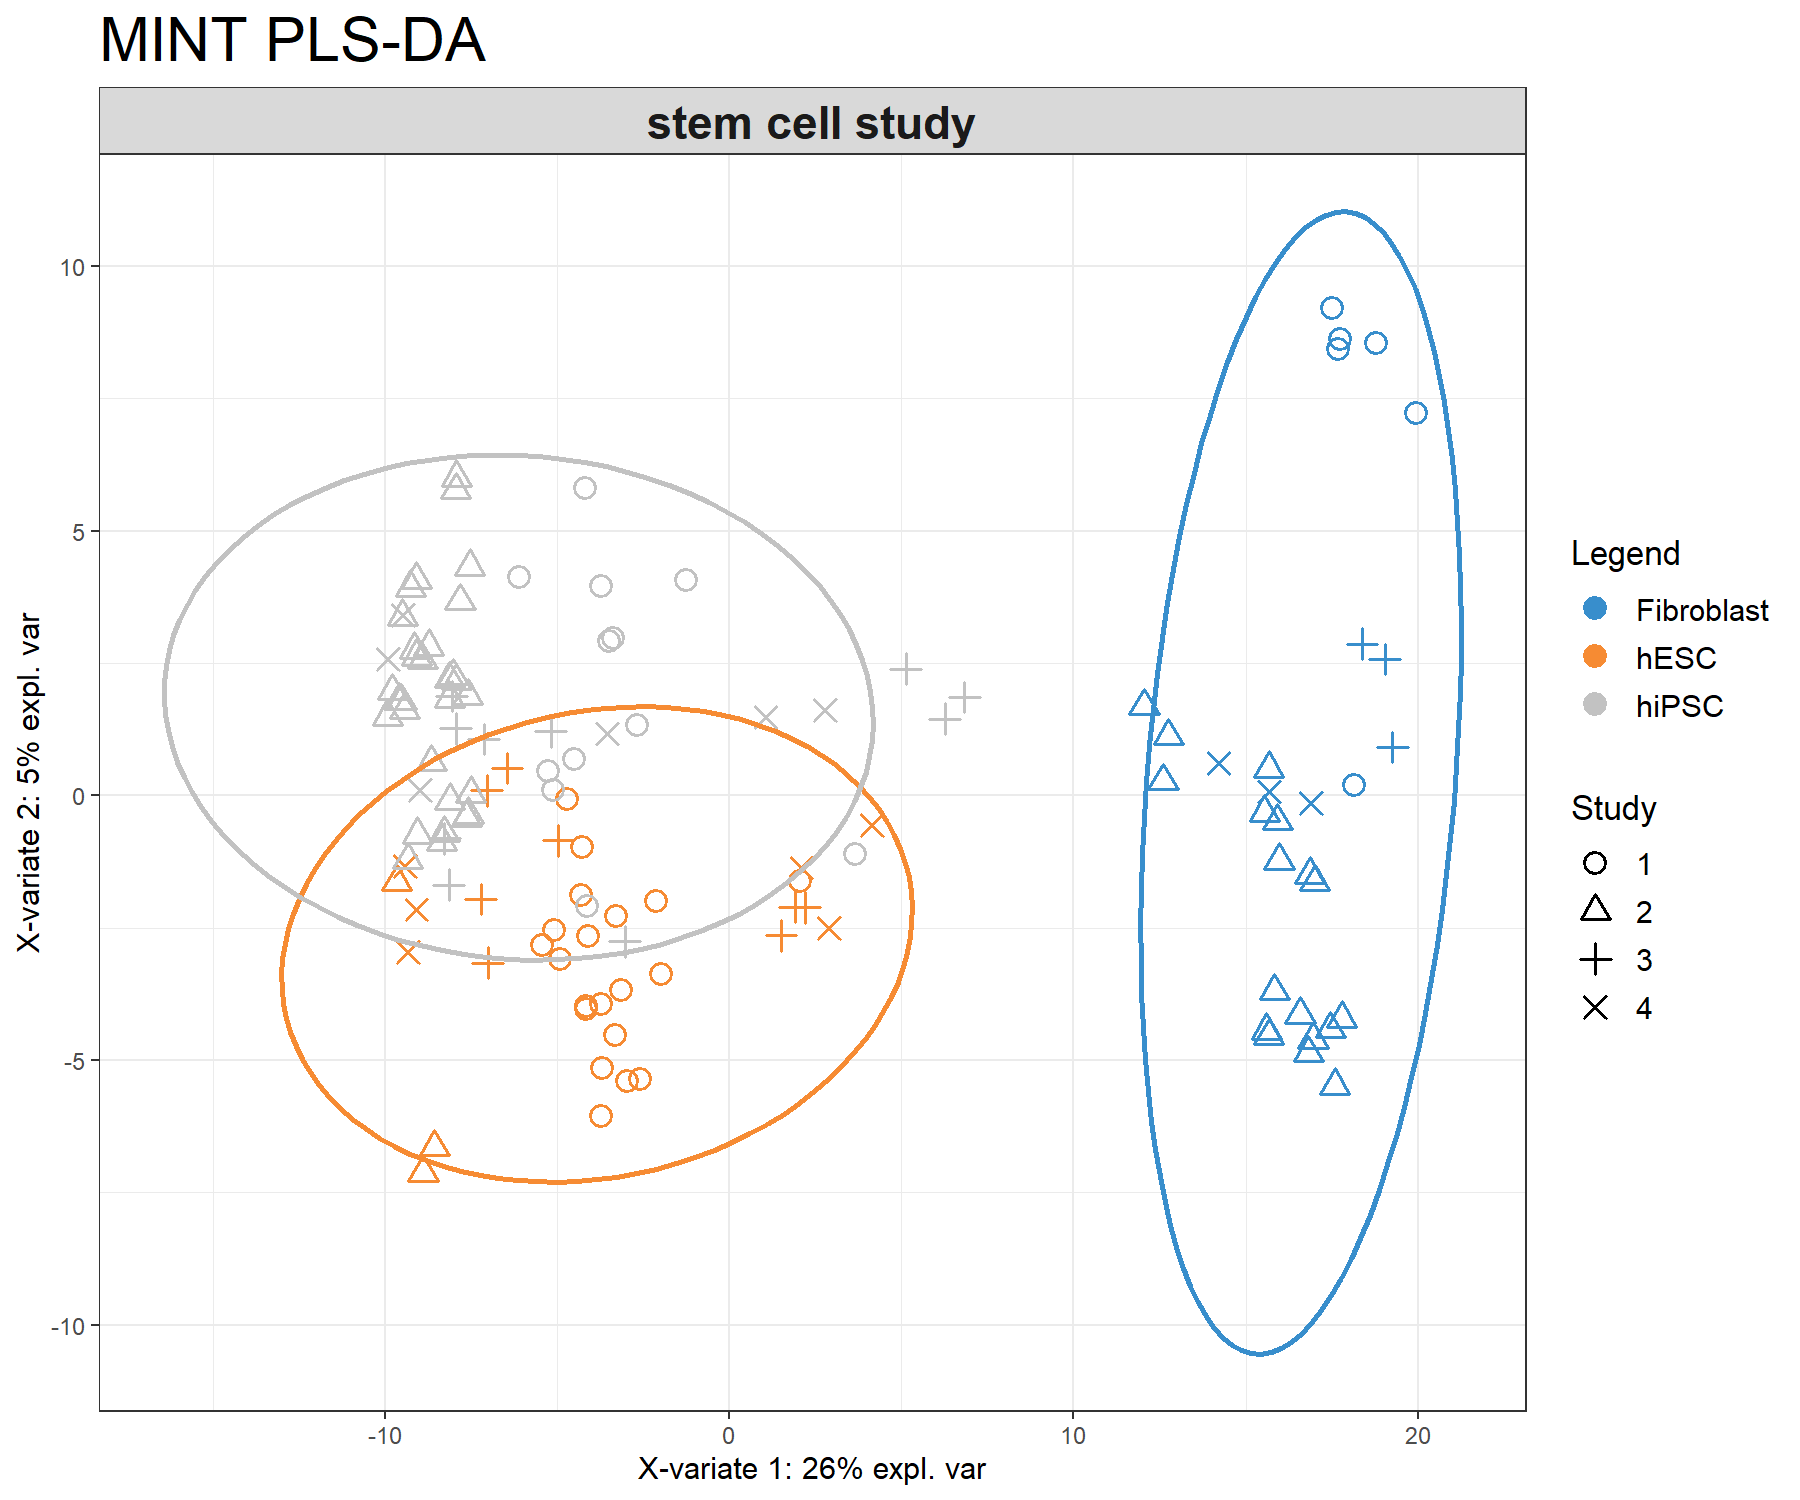 Sample plot from the MINT PLS-DA performed on the stemcells gene expression data. Samples are projected into the space spanned by the first two components. Samples are coloured by their cell types and symbols indicate the study membership. Component 1 discriminates fibroblast vs. the others, while component 2 discriminates some of the hiPSC vs. hESC.